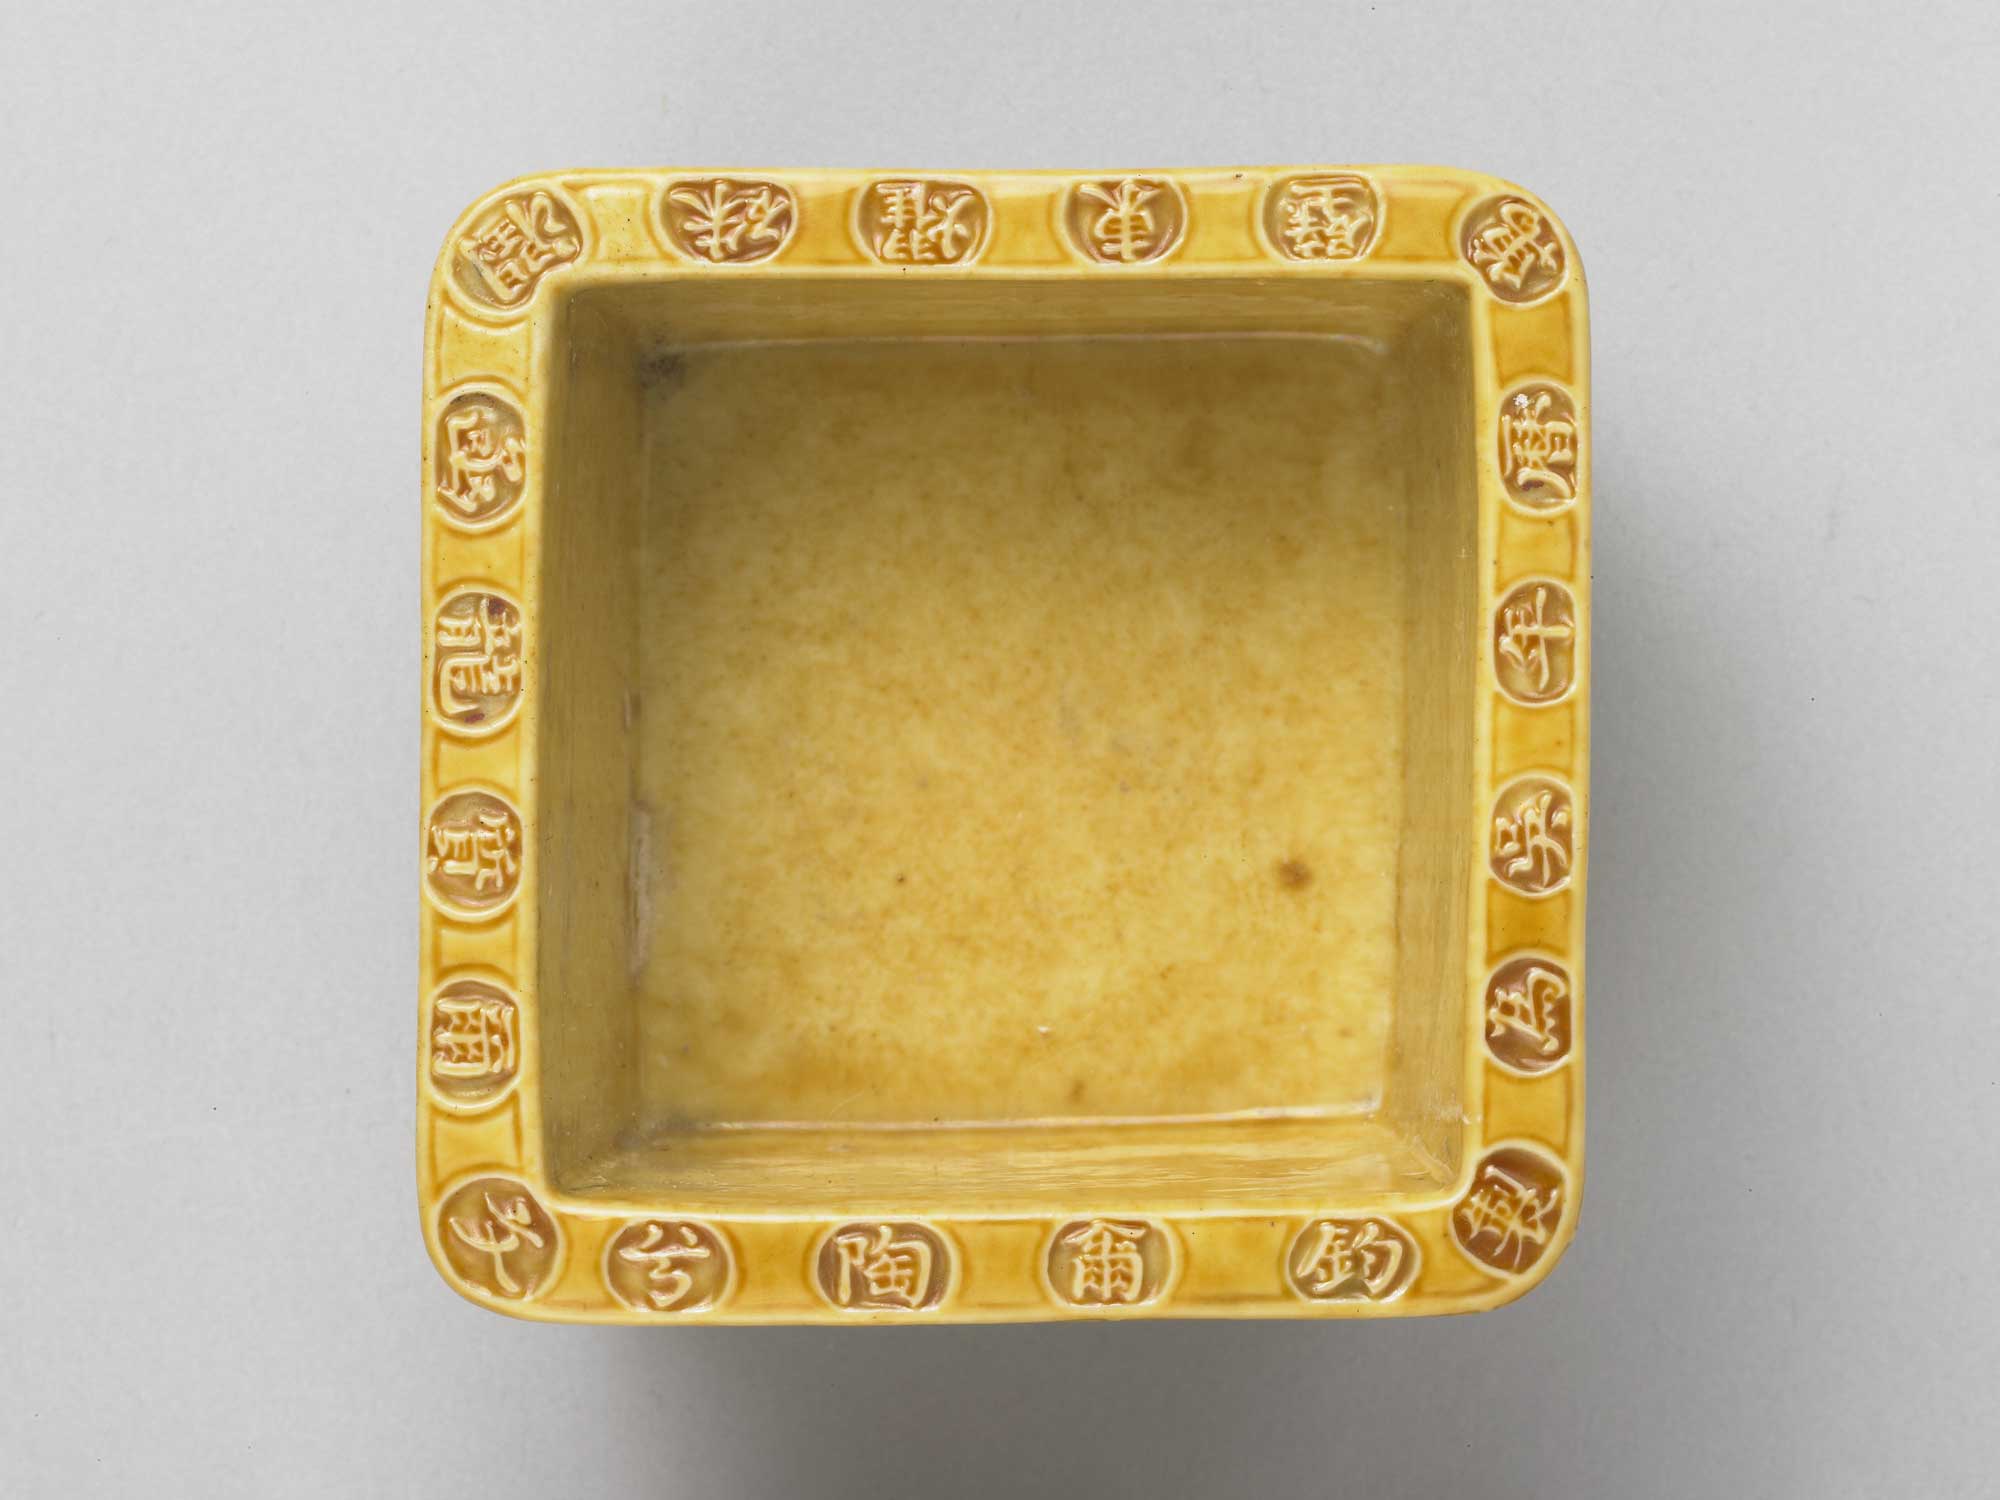 Square Yu Basin with Nine Carved Dragons in Yellow Glaze